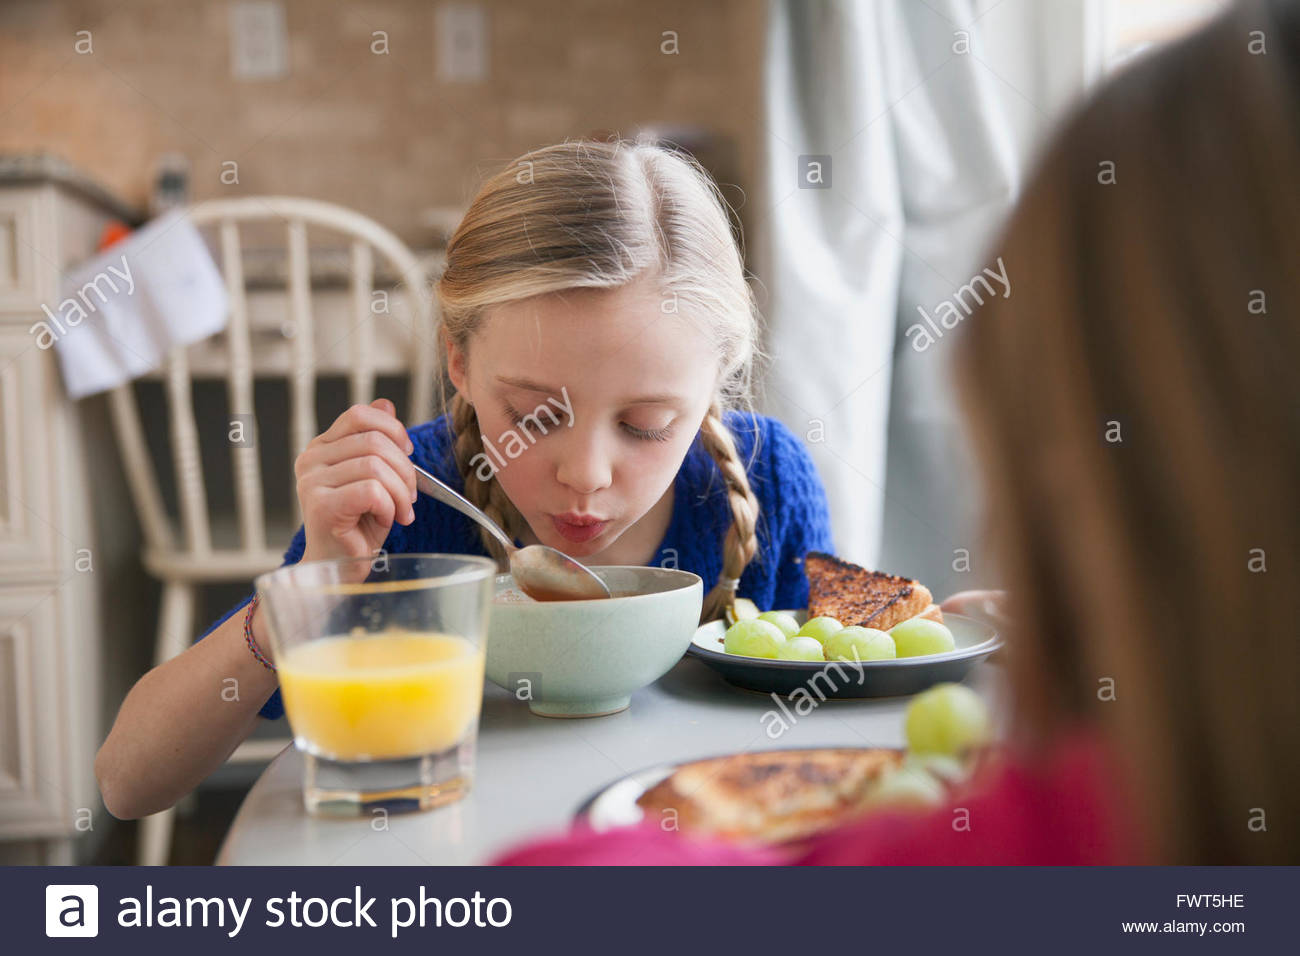 Young girl blowing on soup to cool it Stock Photo